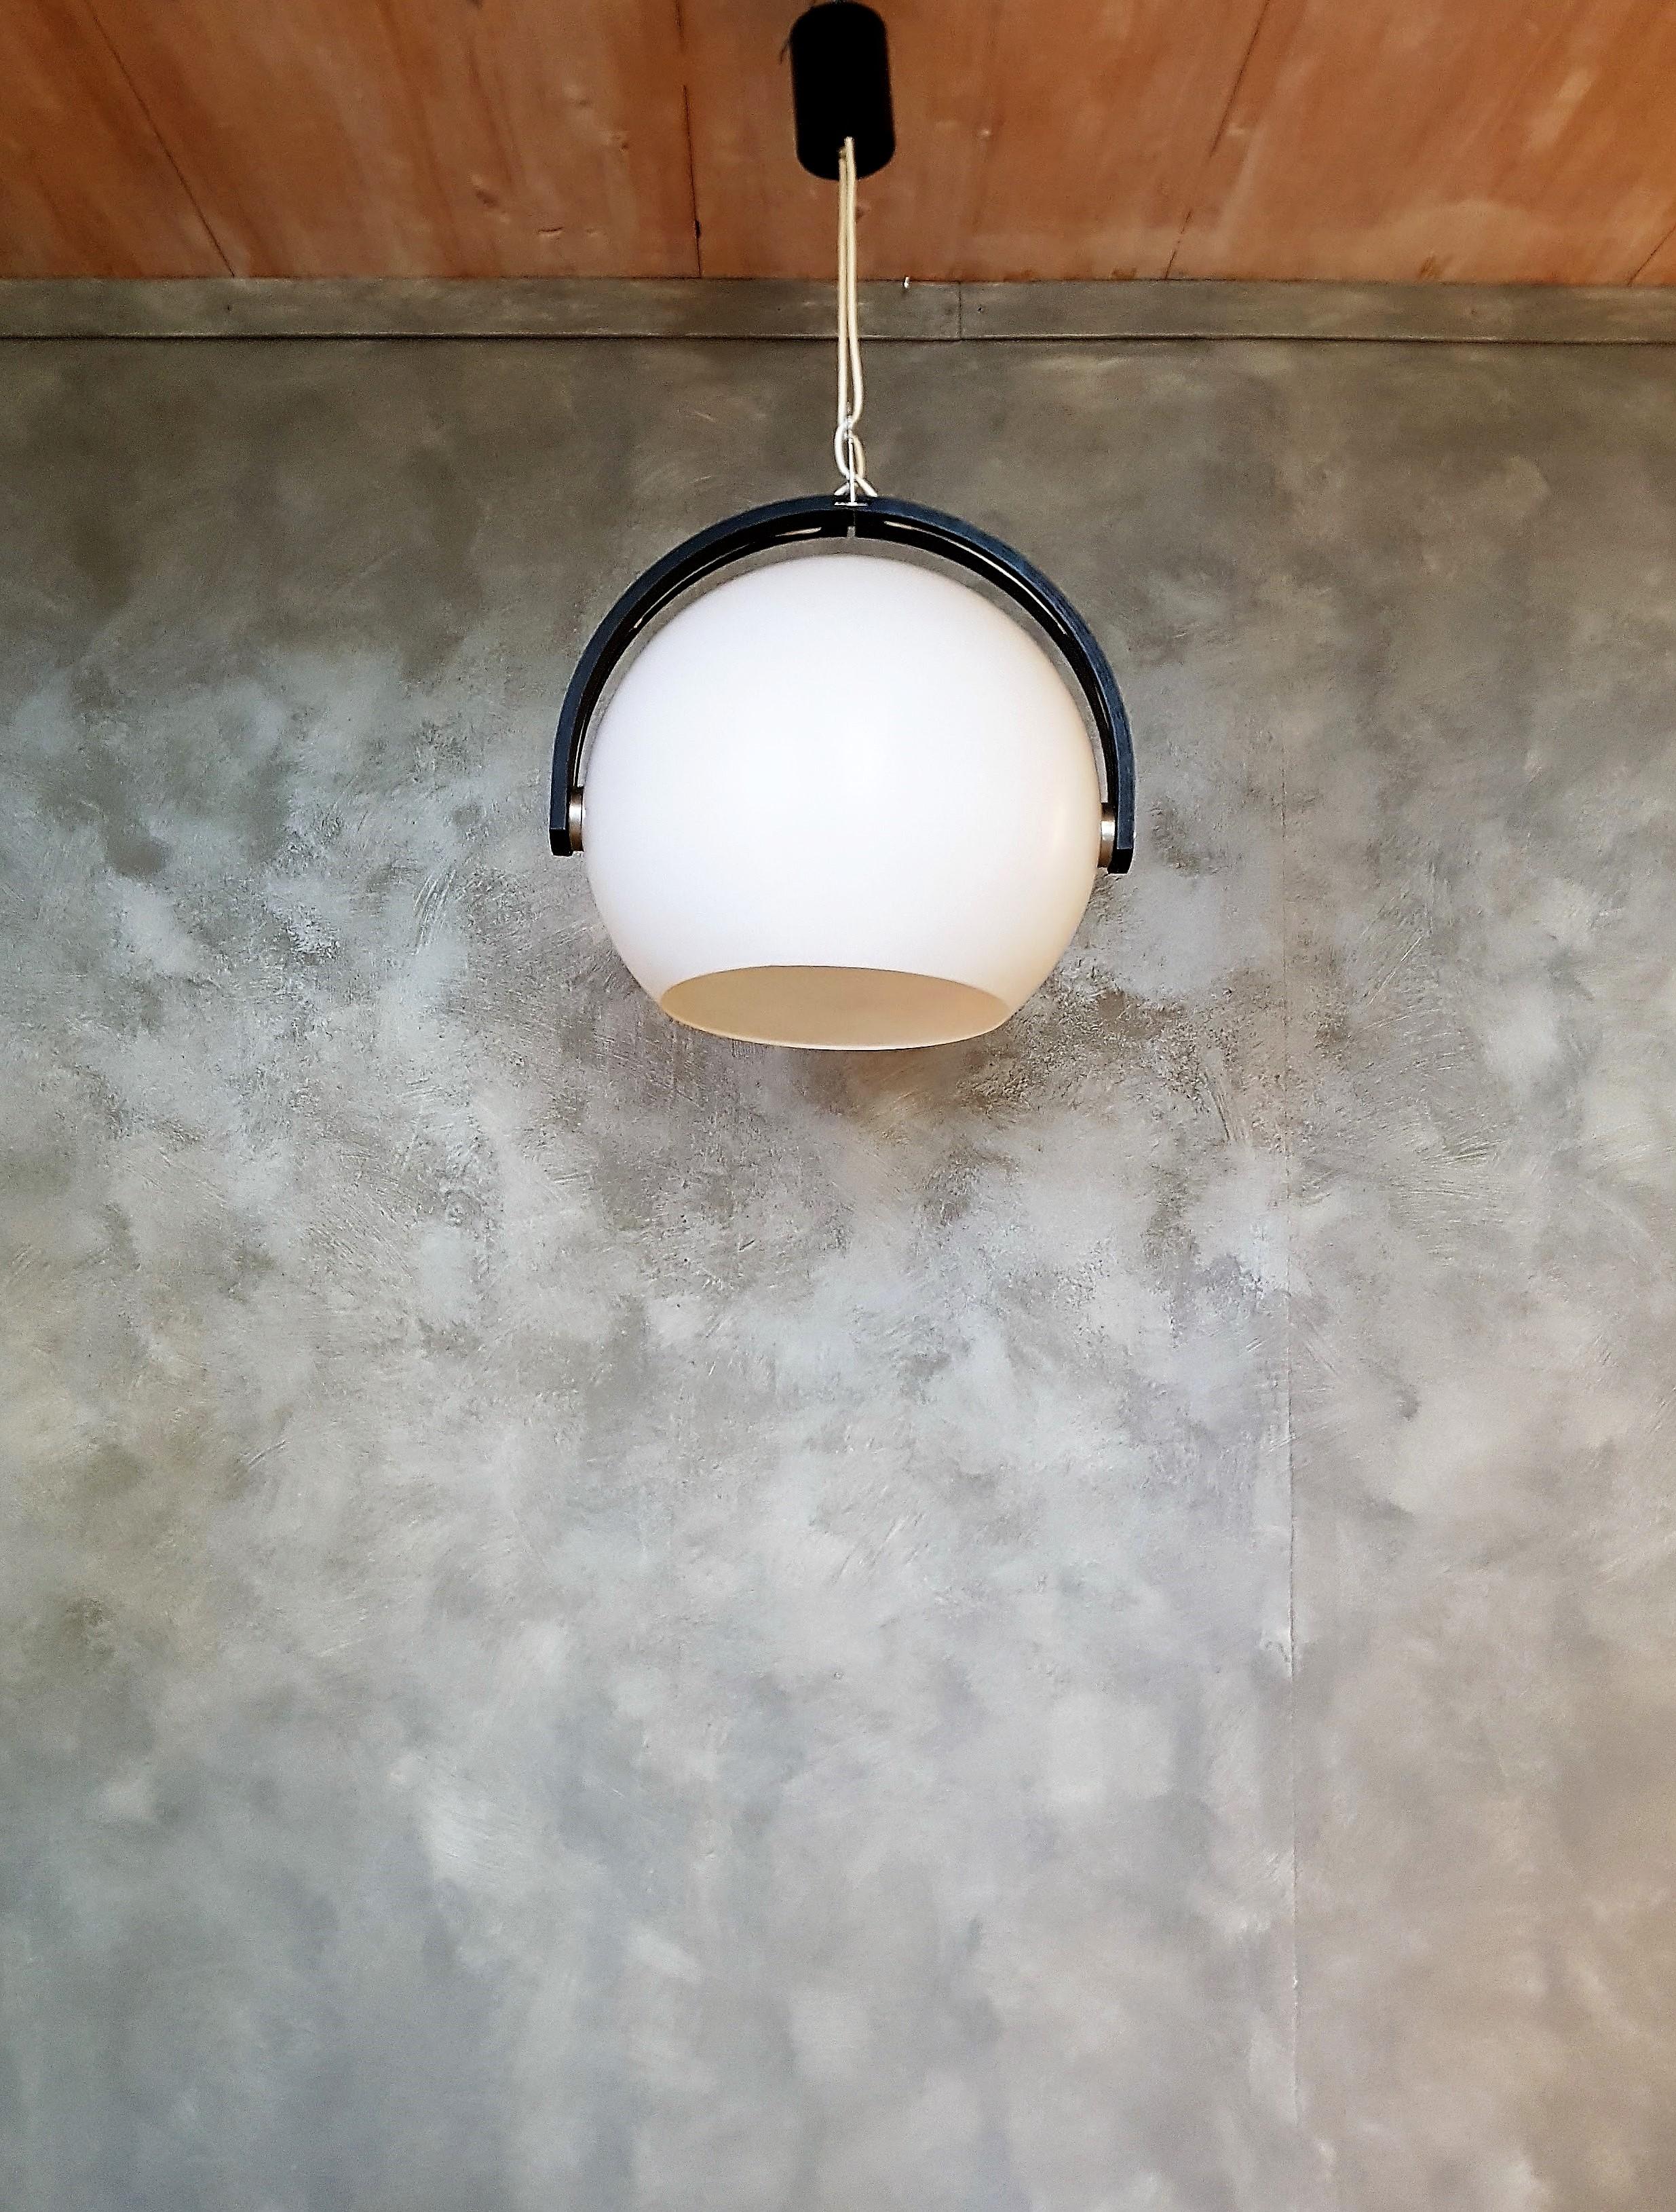 Space Age hanging lamp by Temde-Leuchten, white spherical reflector made of plastic and black laminated wood ring. The reflector rotates in the wooden bracket.